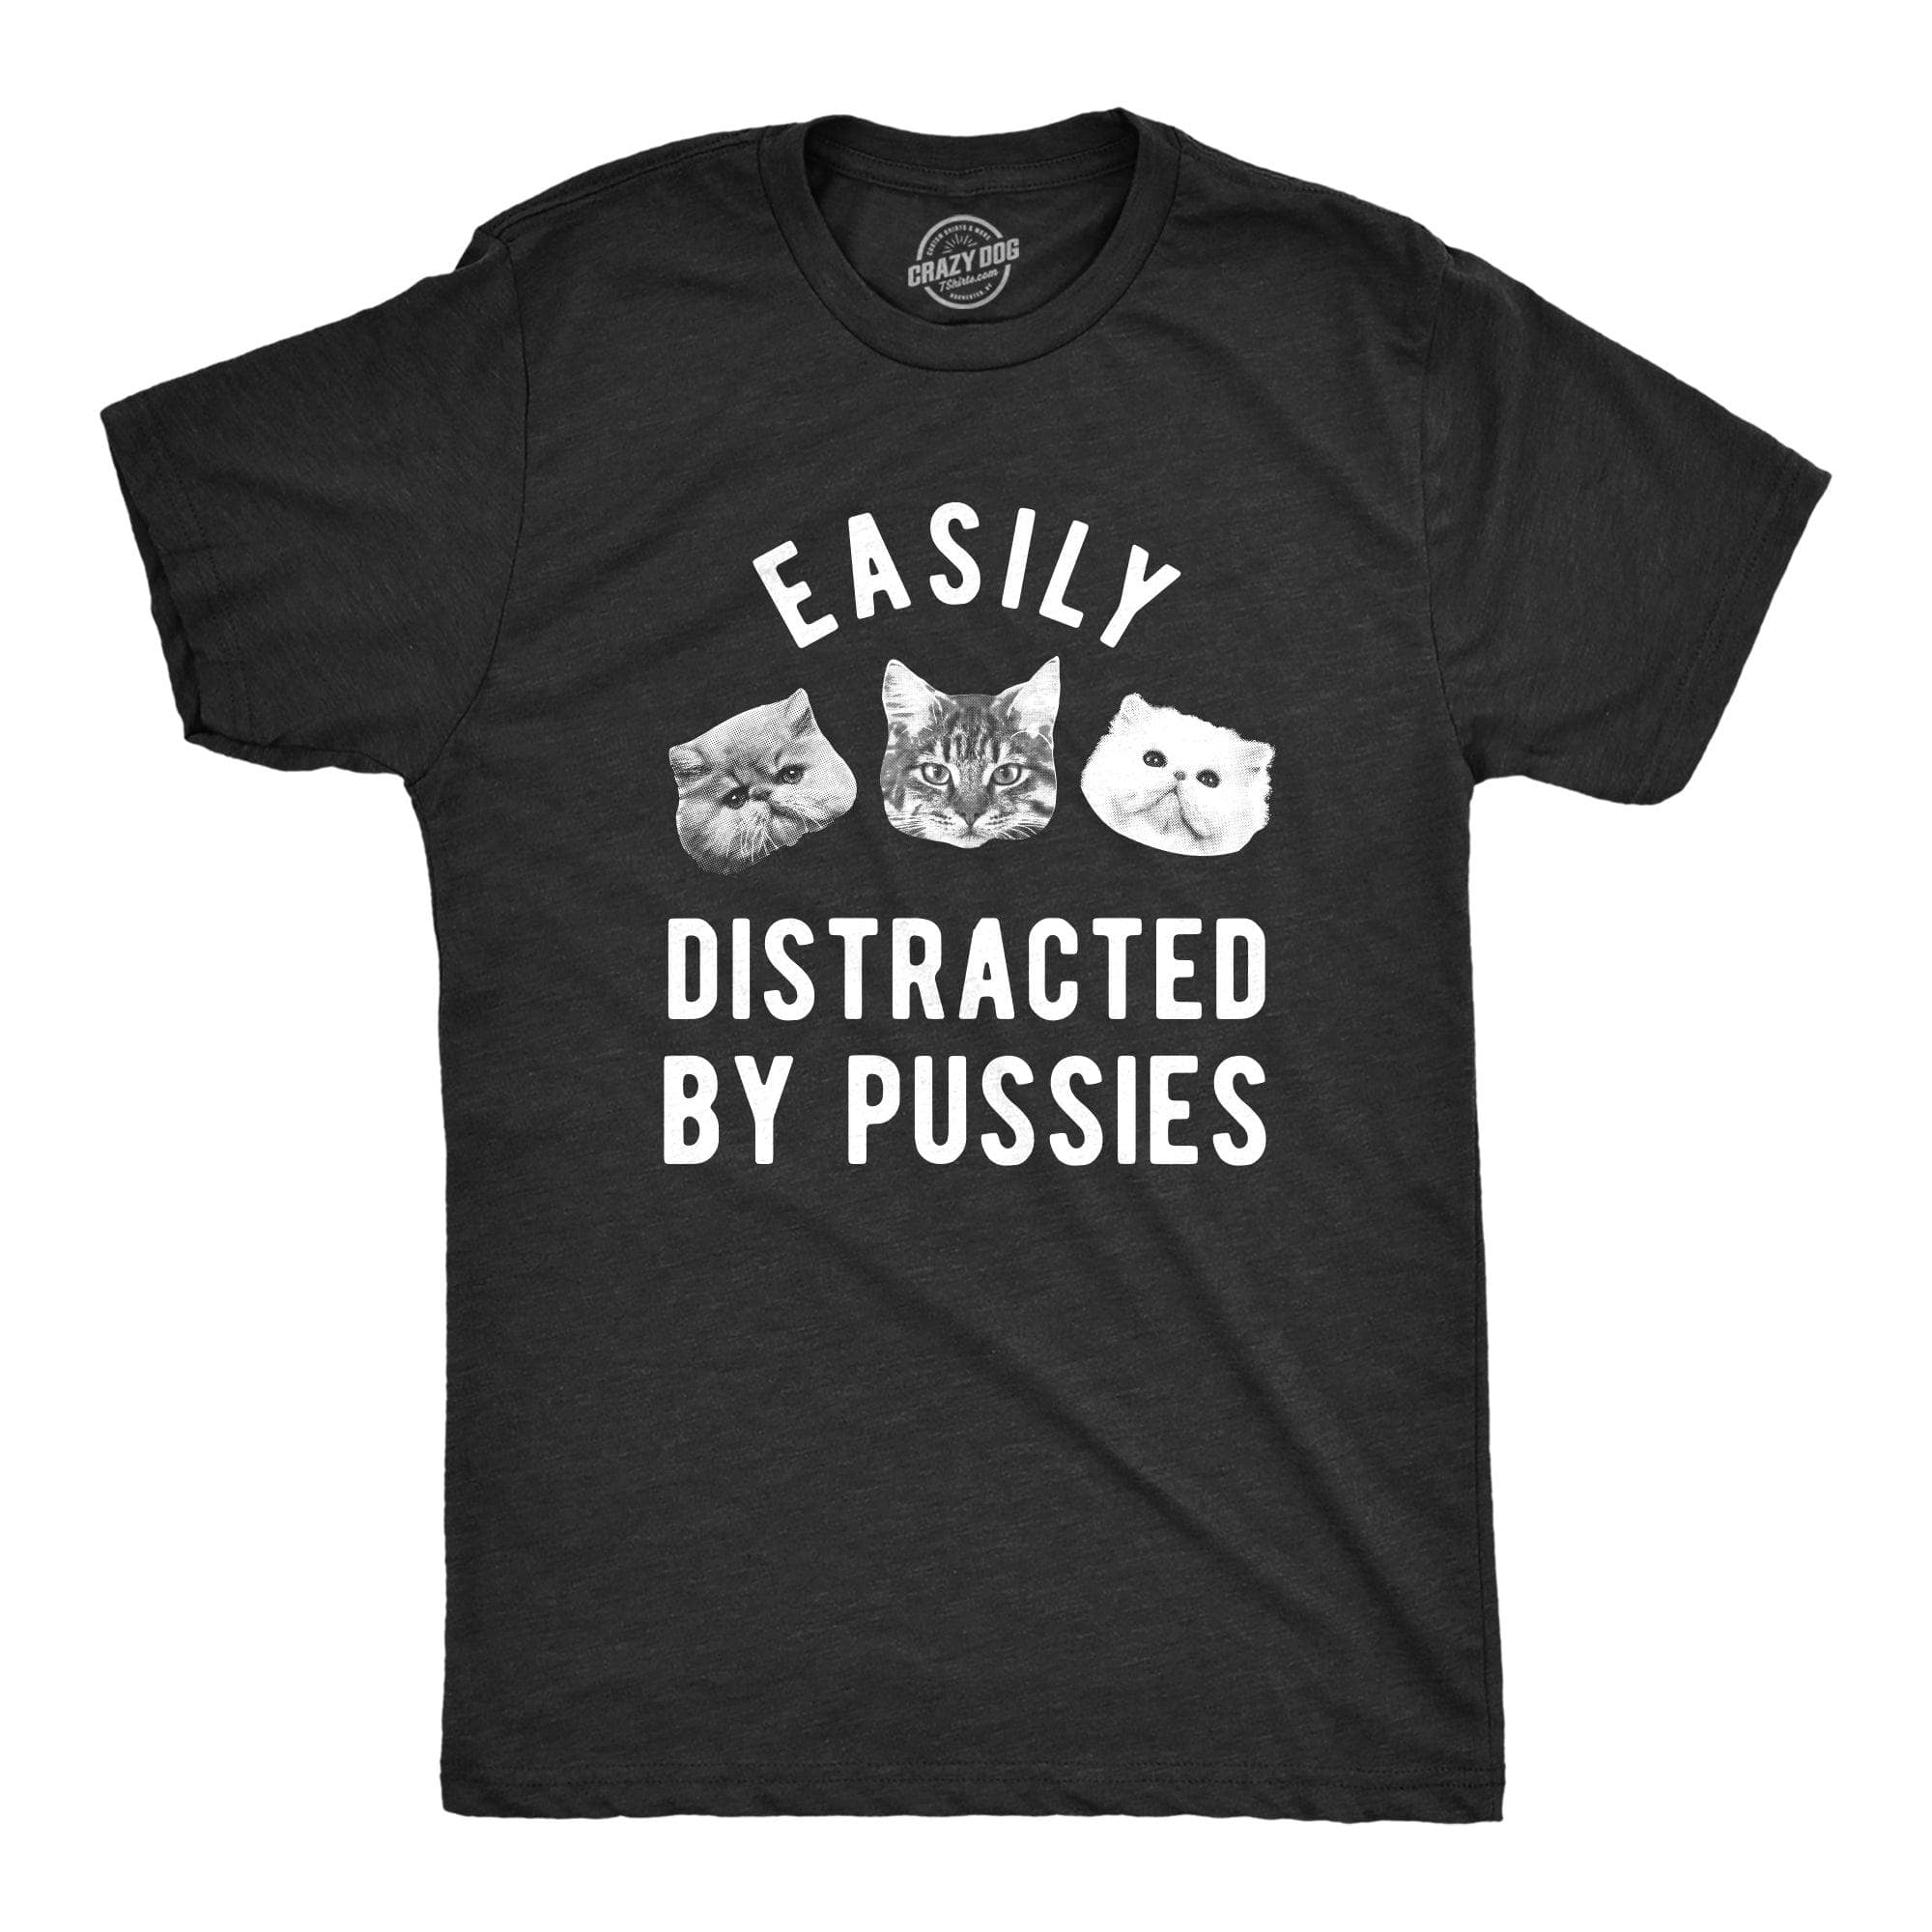 Easily Distracted By Pussies Men's Tshirt  -  Crazy Dog T-Shirts